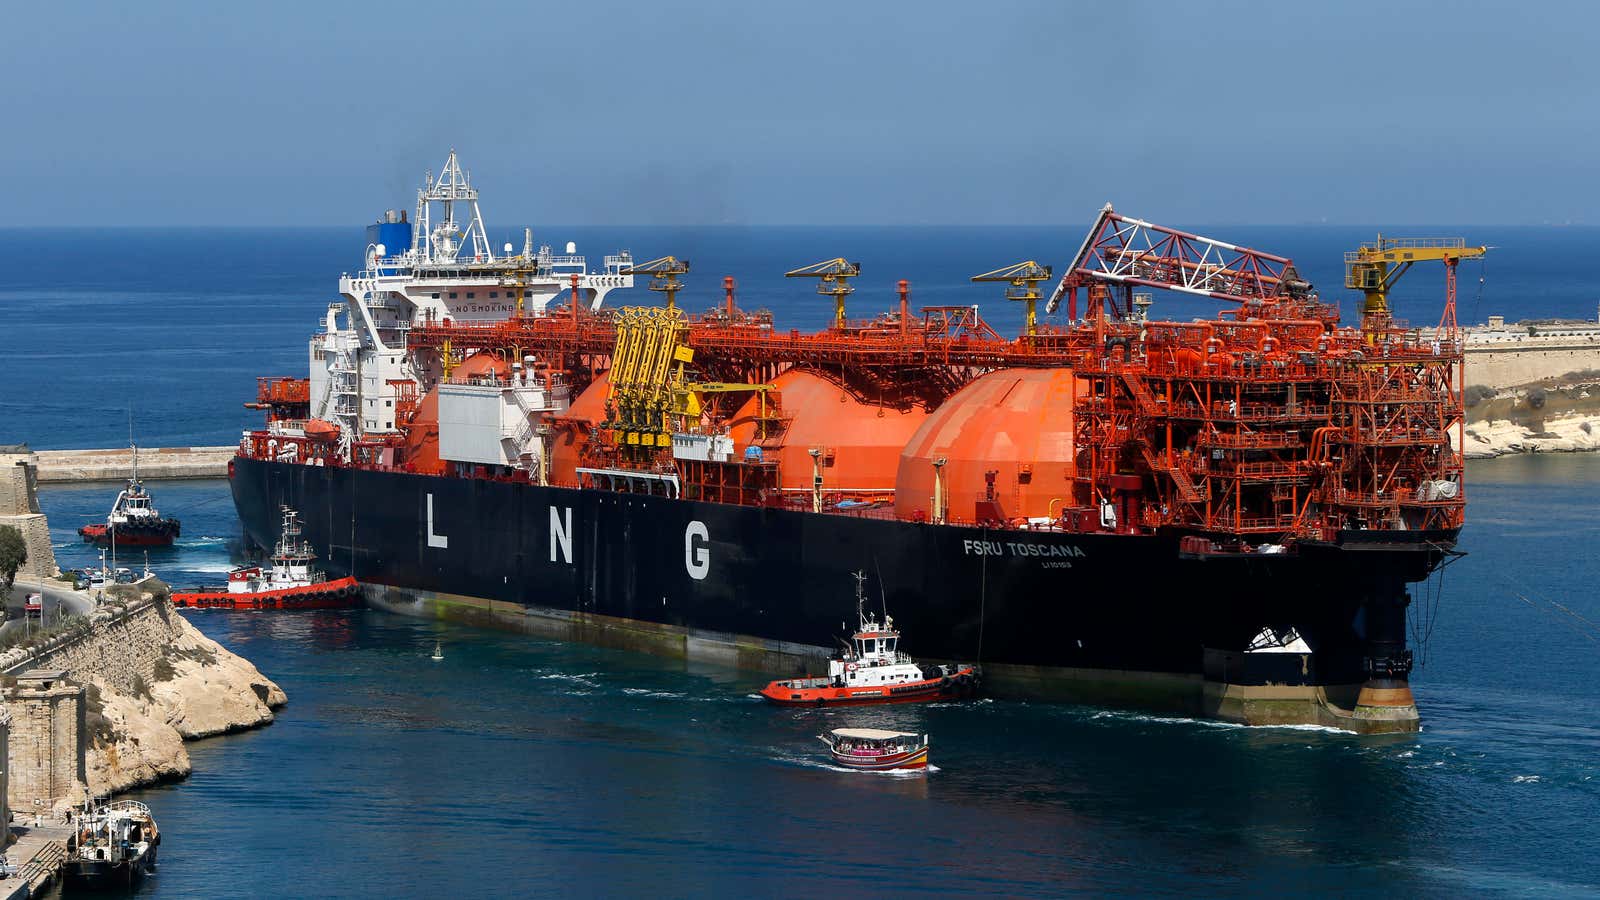 Europe is counting on floating gas terminals to get through the winter